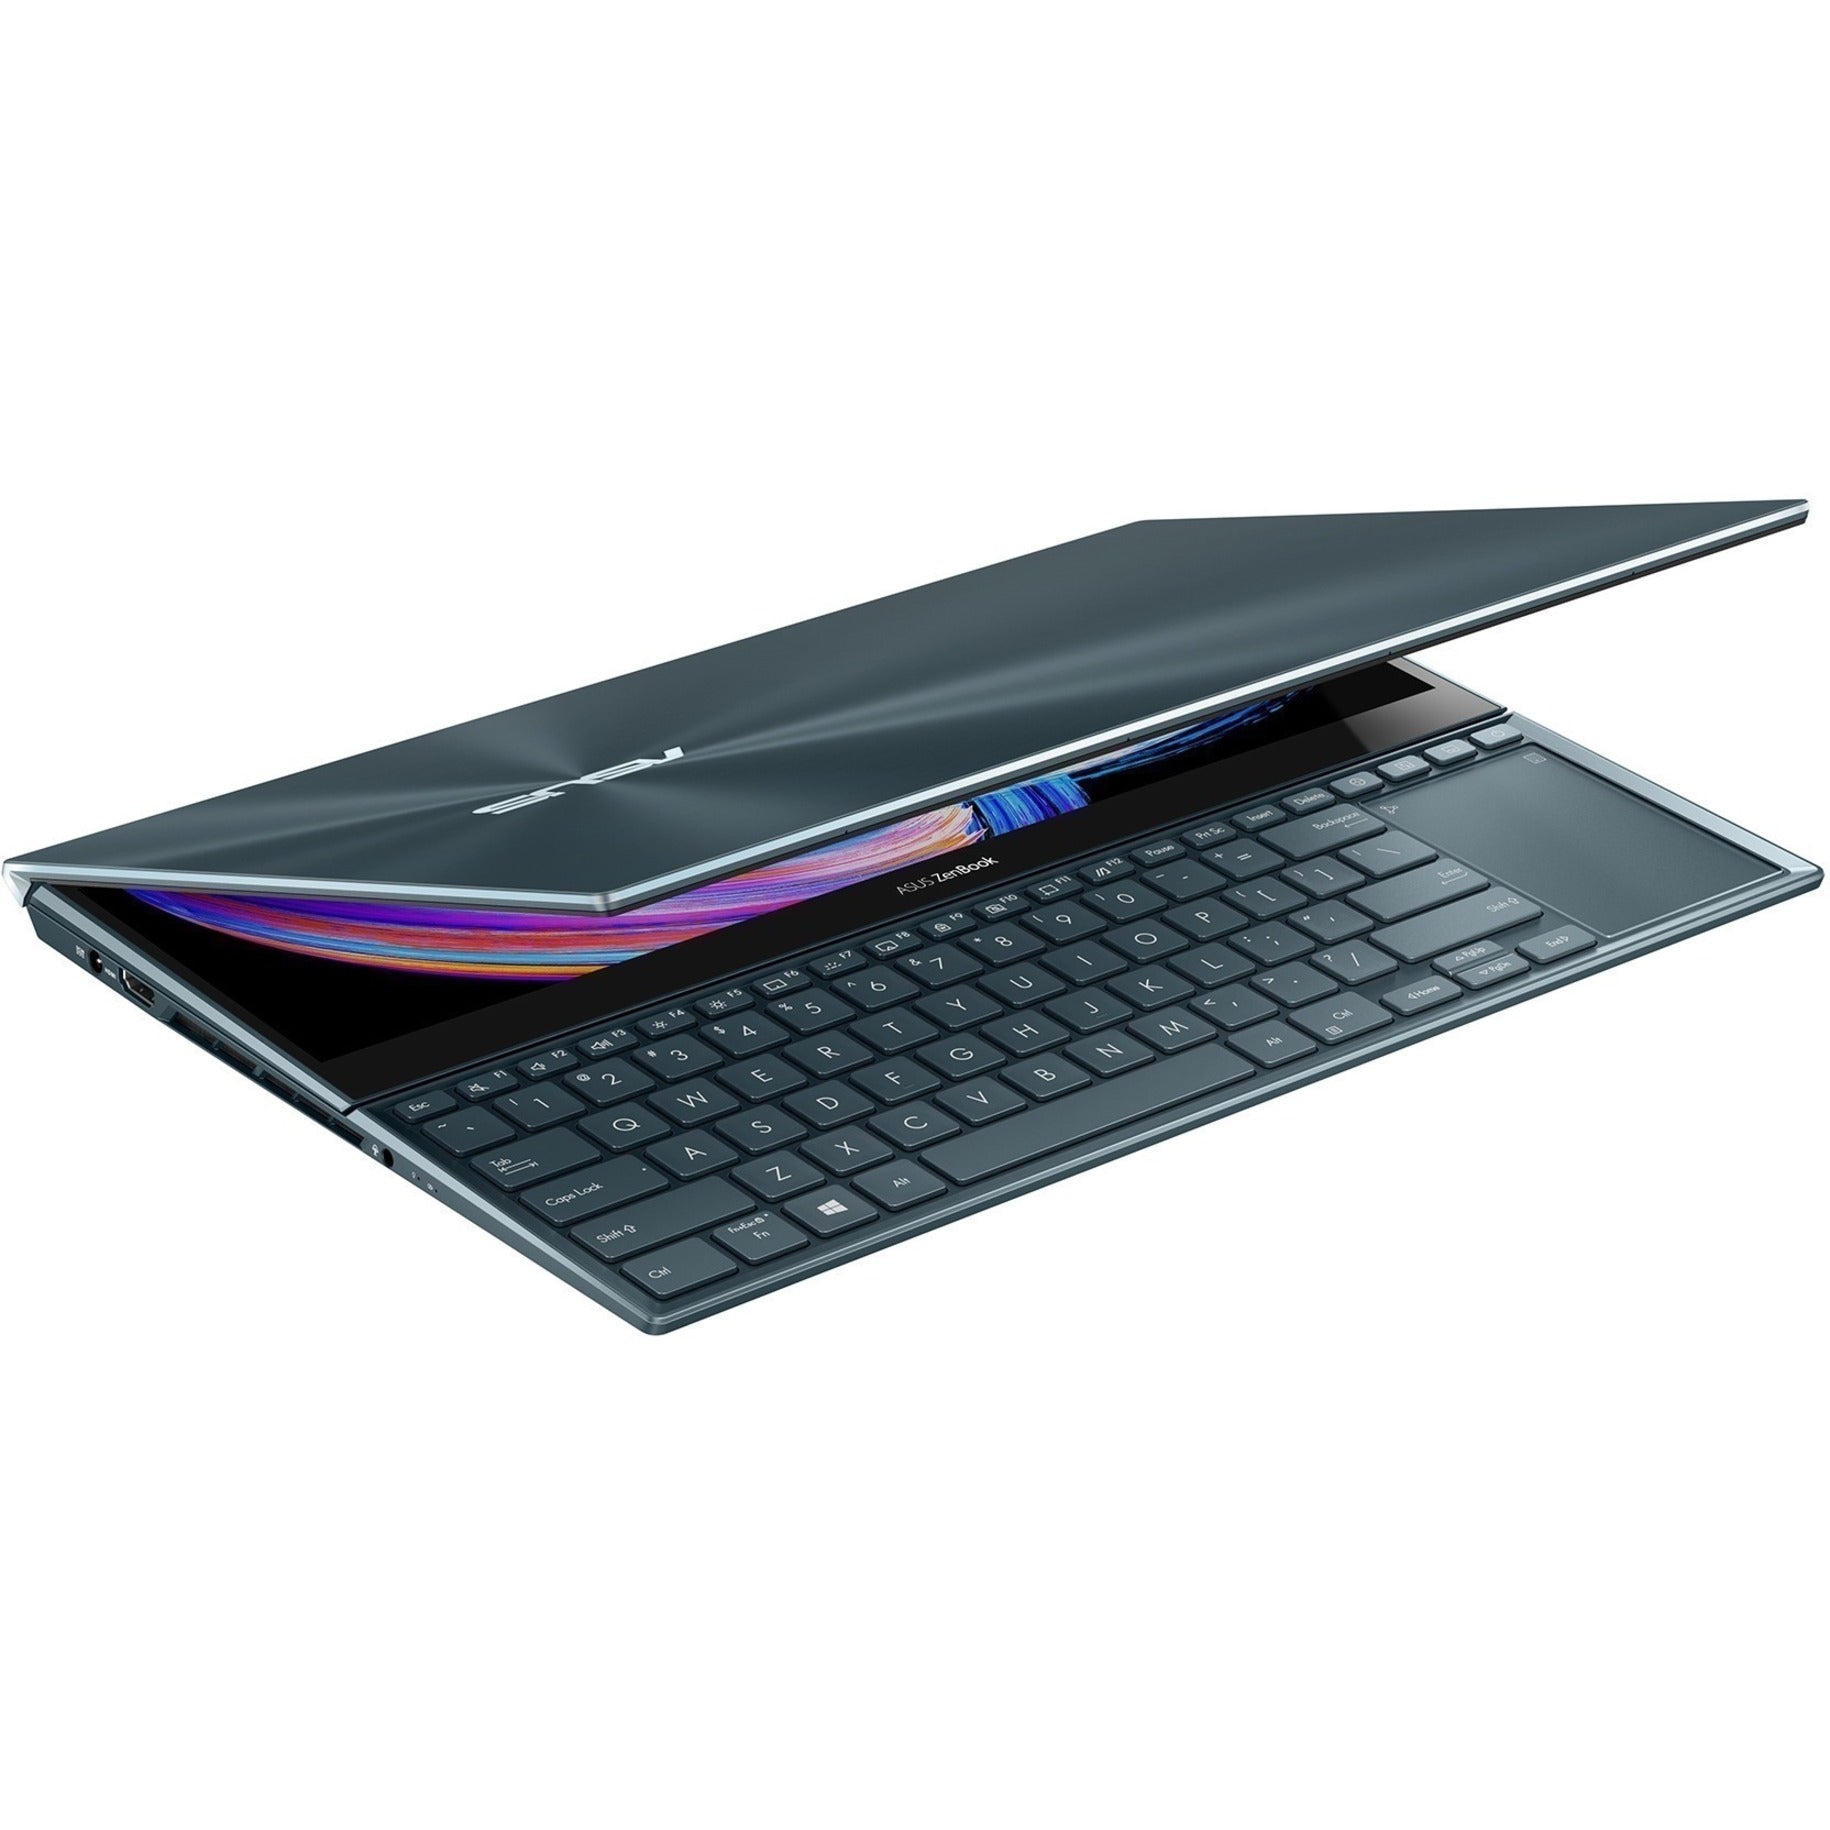 Asus UX582ZM-XS99T ZenBook Pro Duo 15 OLED 15.6" Touchscreen Notebook, Intel Core i9, 32GB RAM, 1TB SSD, Celestial Blue